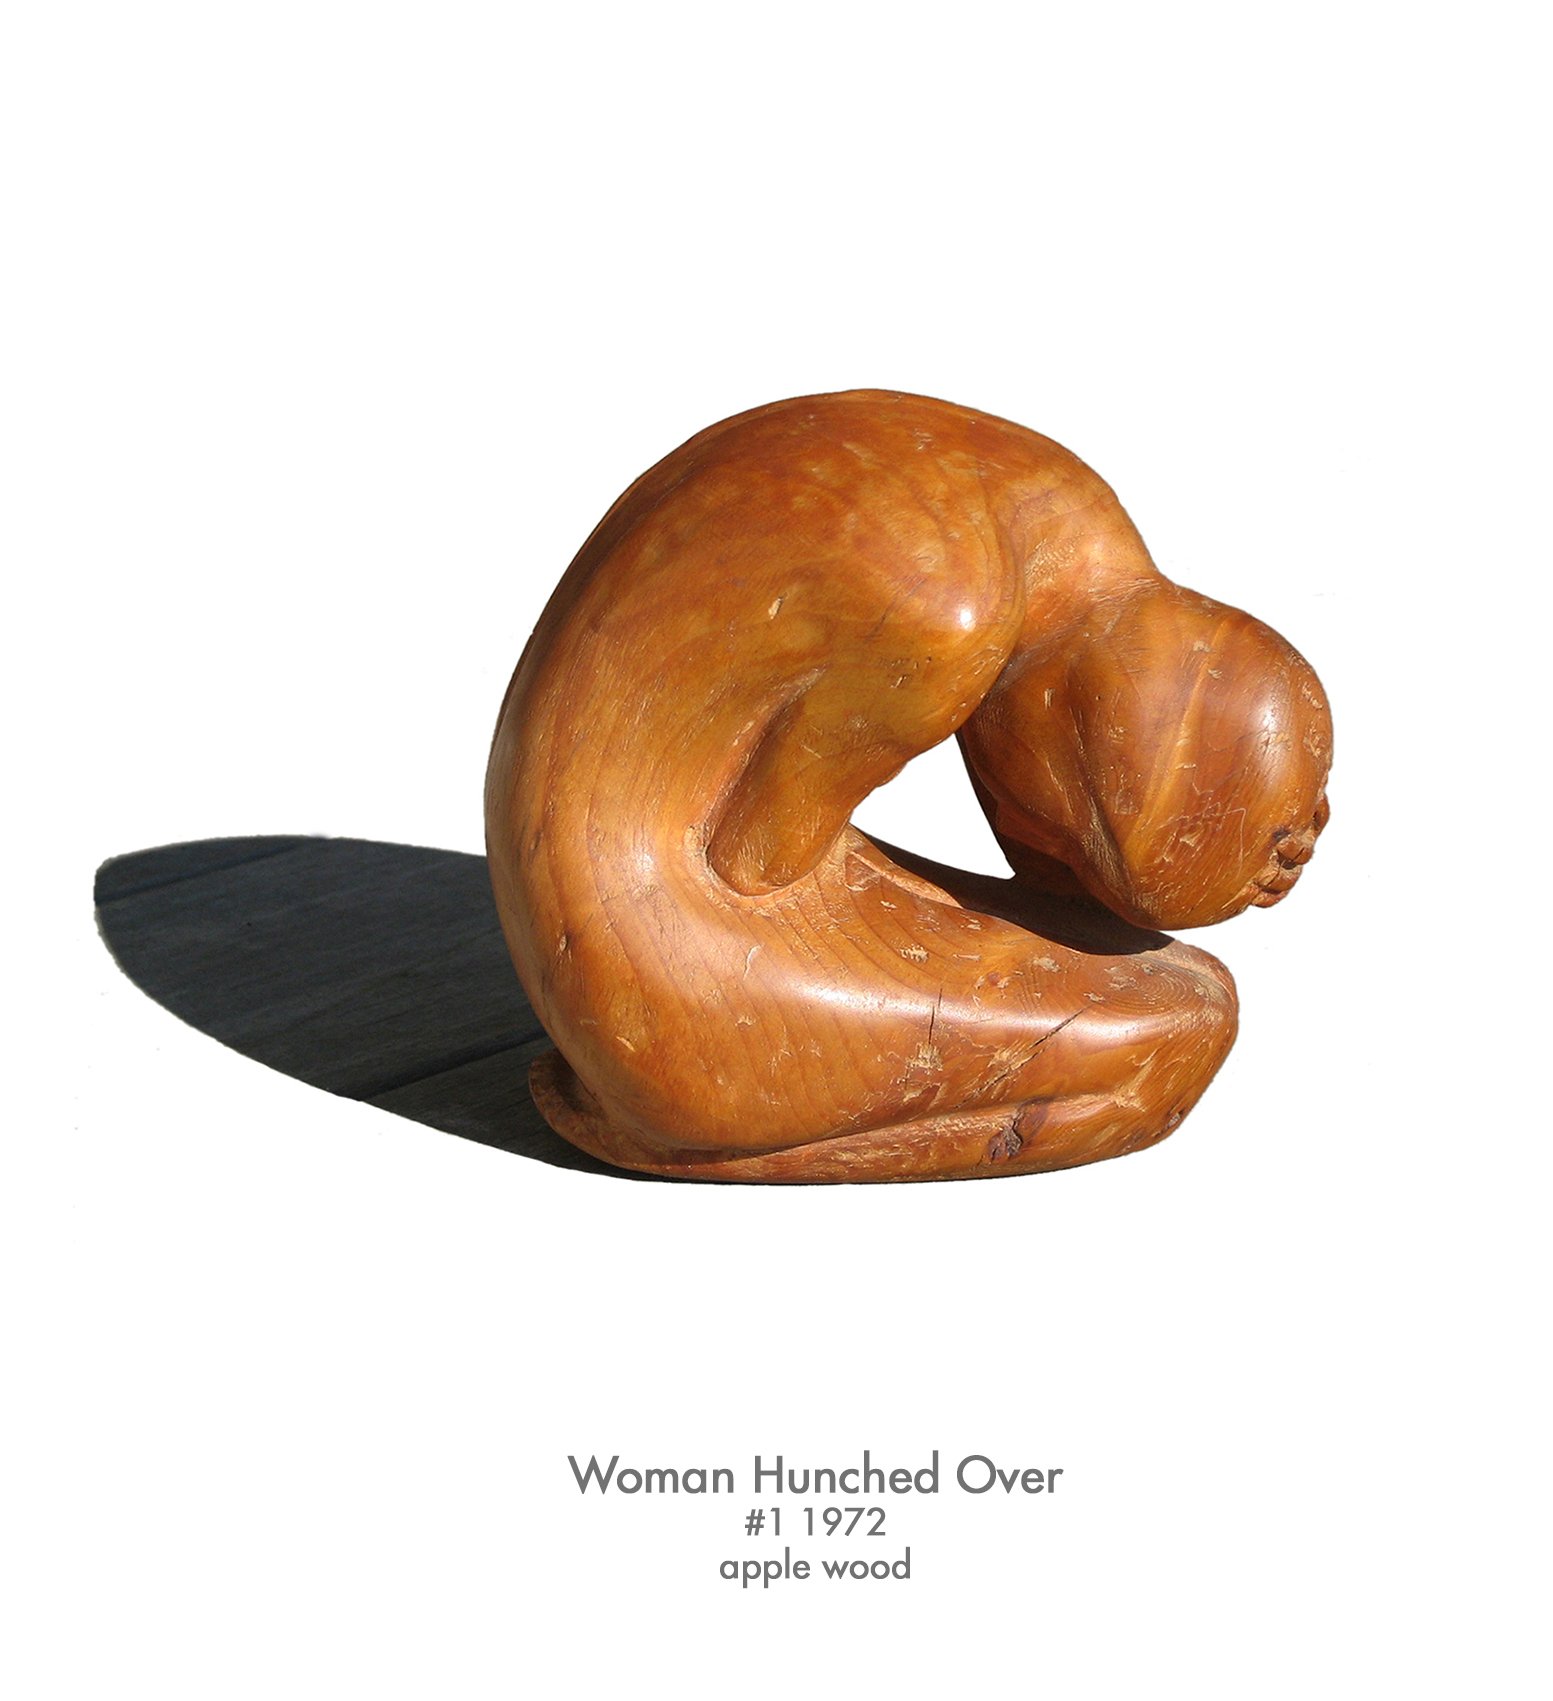 Woman Hunched Over, 1972, applewood, #1